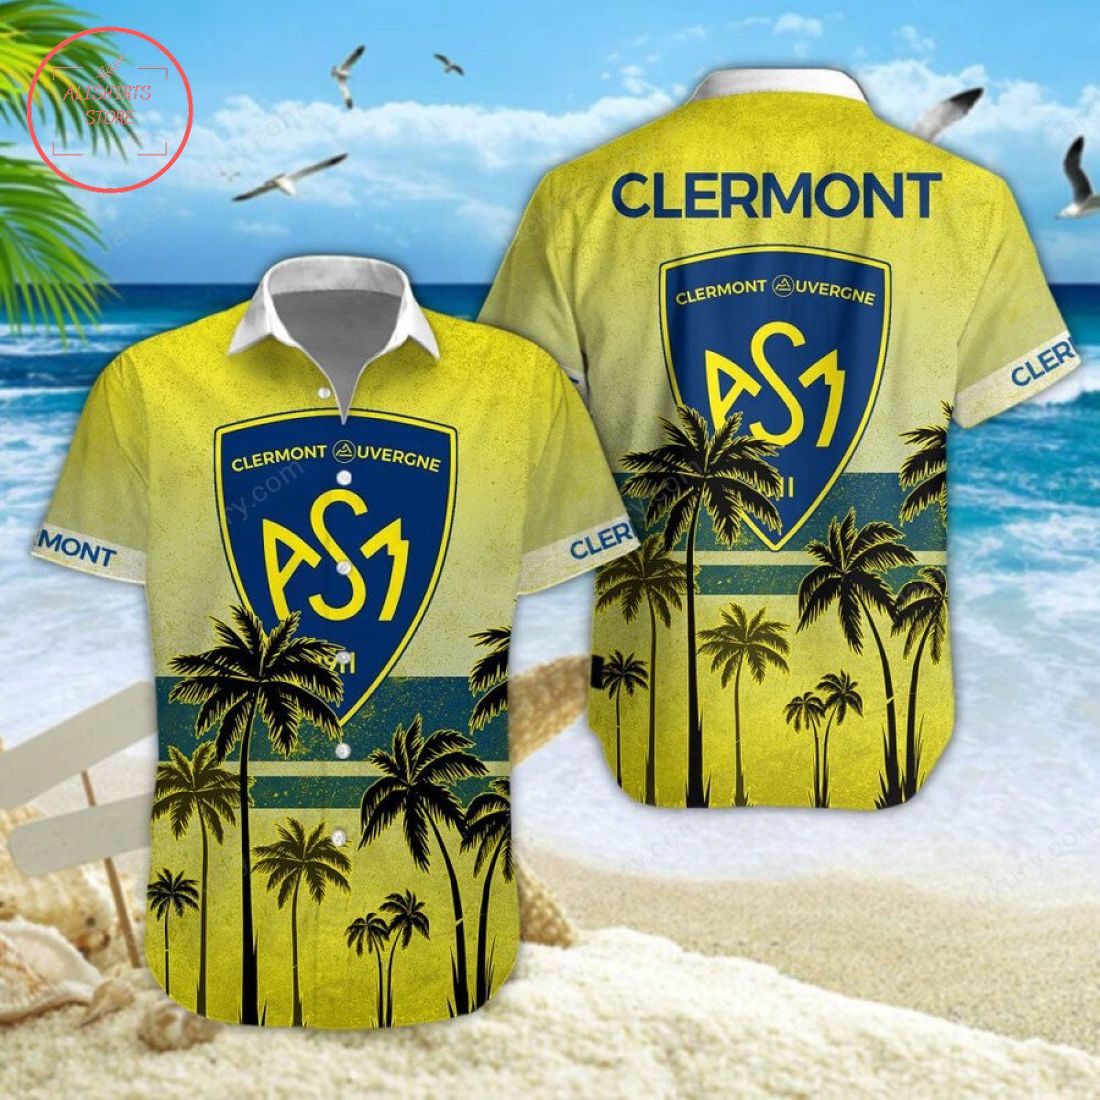 ASM Clermont Auvergne Hawaiian Shirt and Shorts